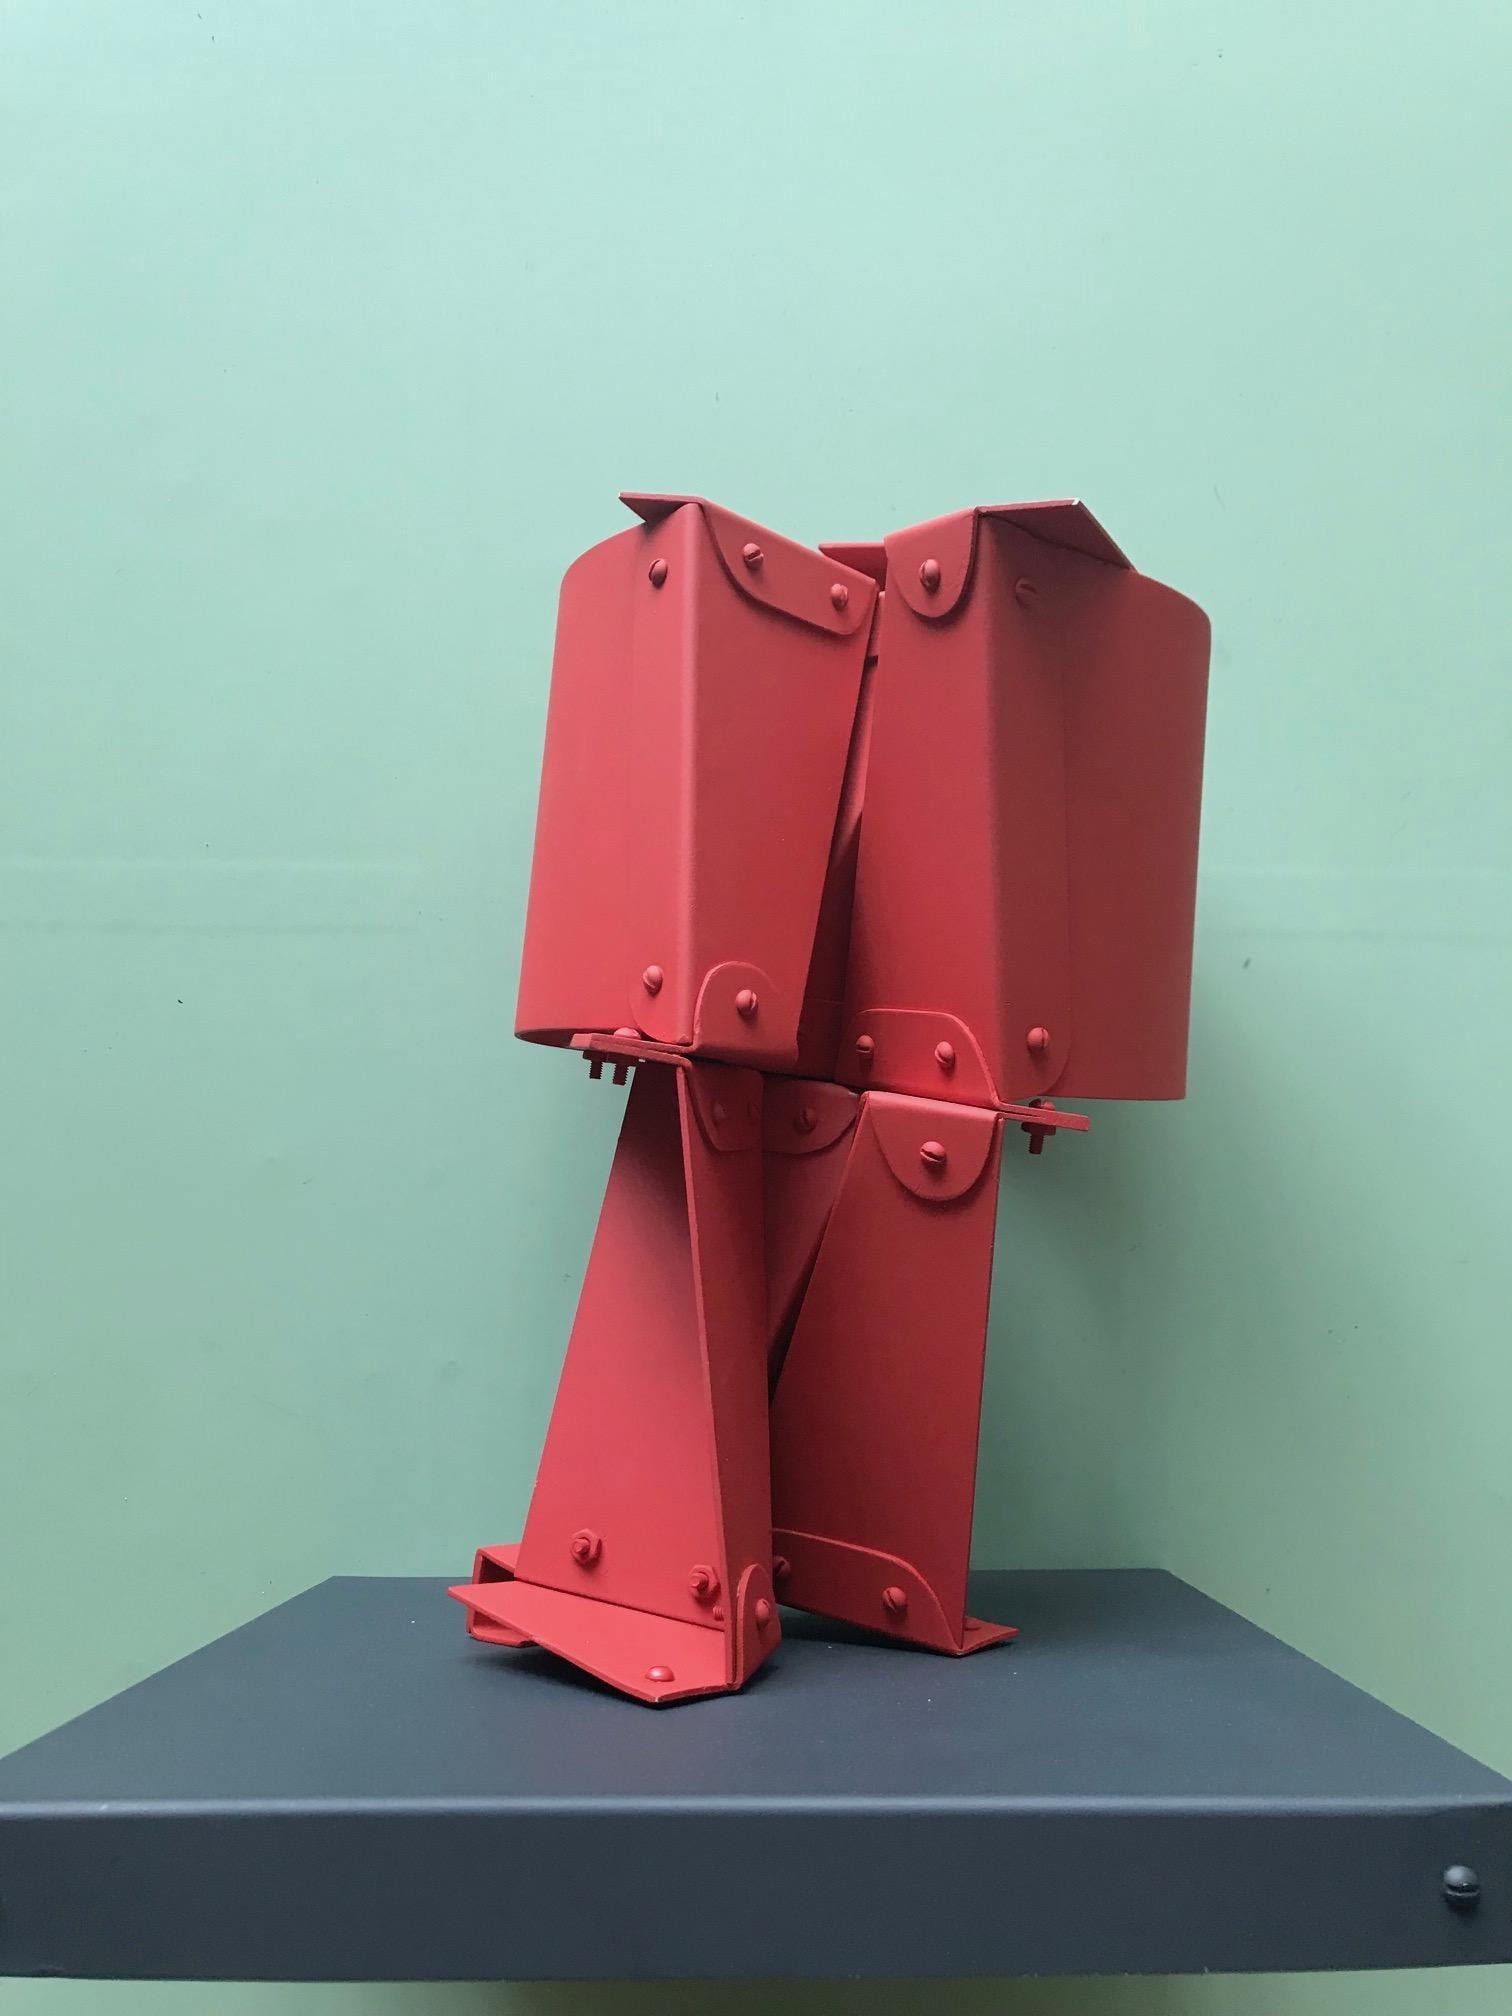  Navegante - Navigator, red modern abstract aluminum sculpture, signed and dated 1977,  AP.
Negret studied at the School of Fine Arts in Cali between 1938 and 1943. The following year, he met in his hometown the Basque sculptor Jorge Oteiza , who